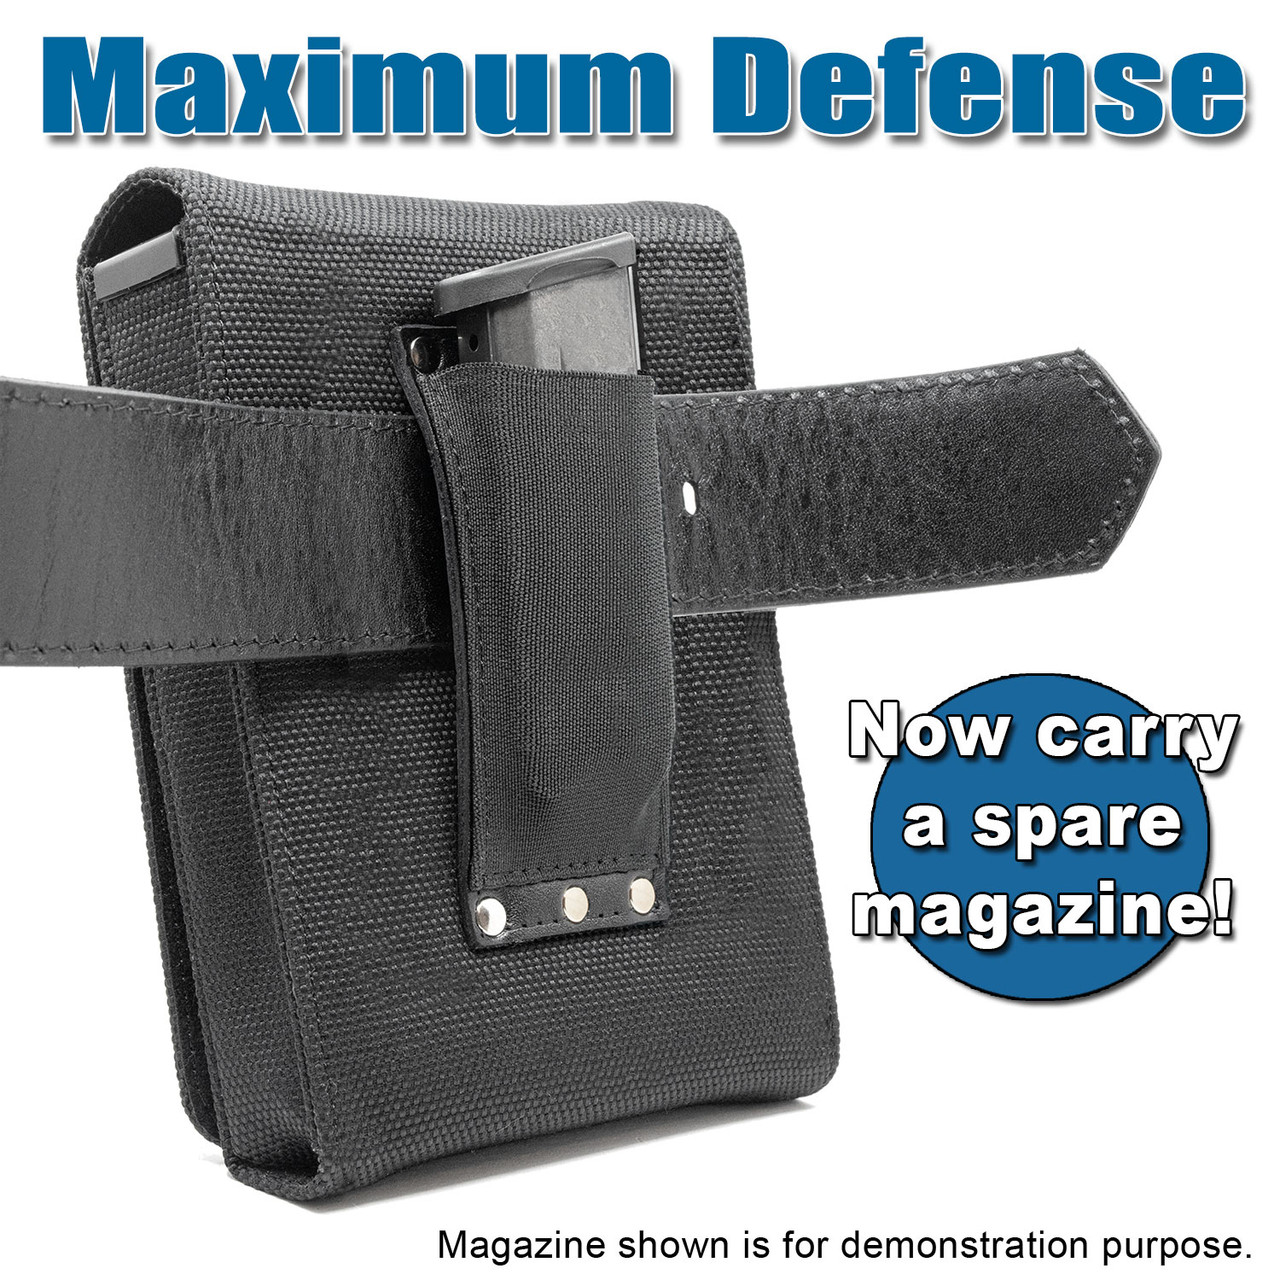 The Rohrbaugh .380 Max Defense Holster